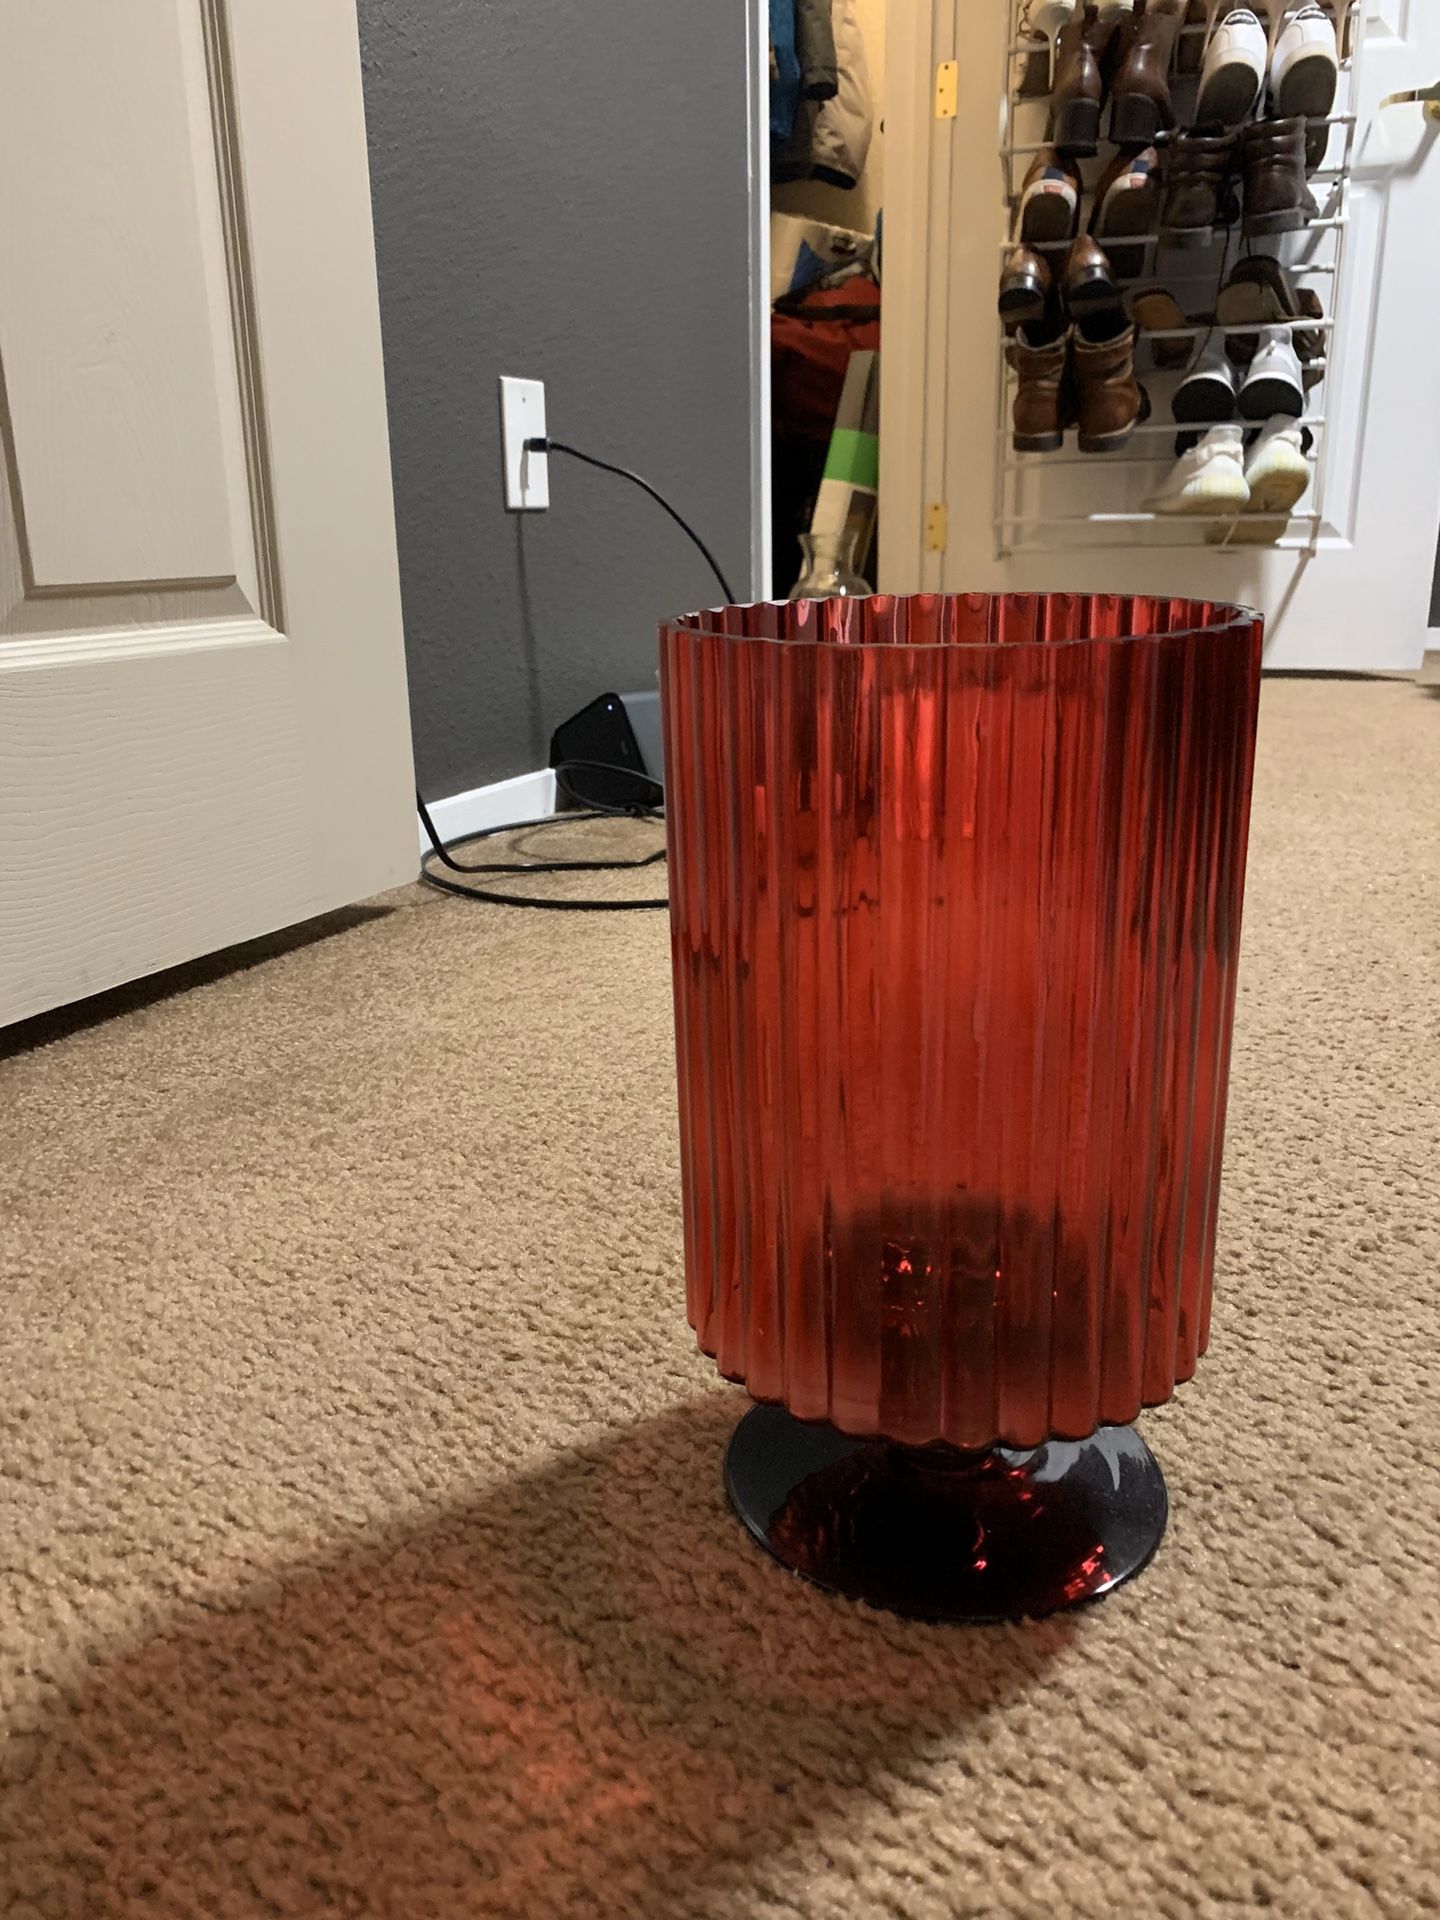 Red vase for flowers or decor